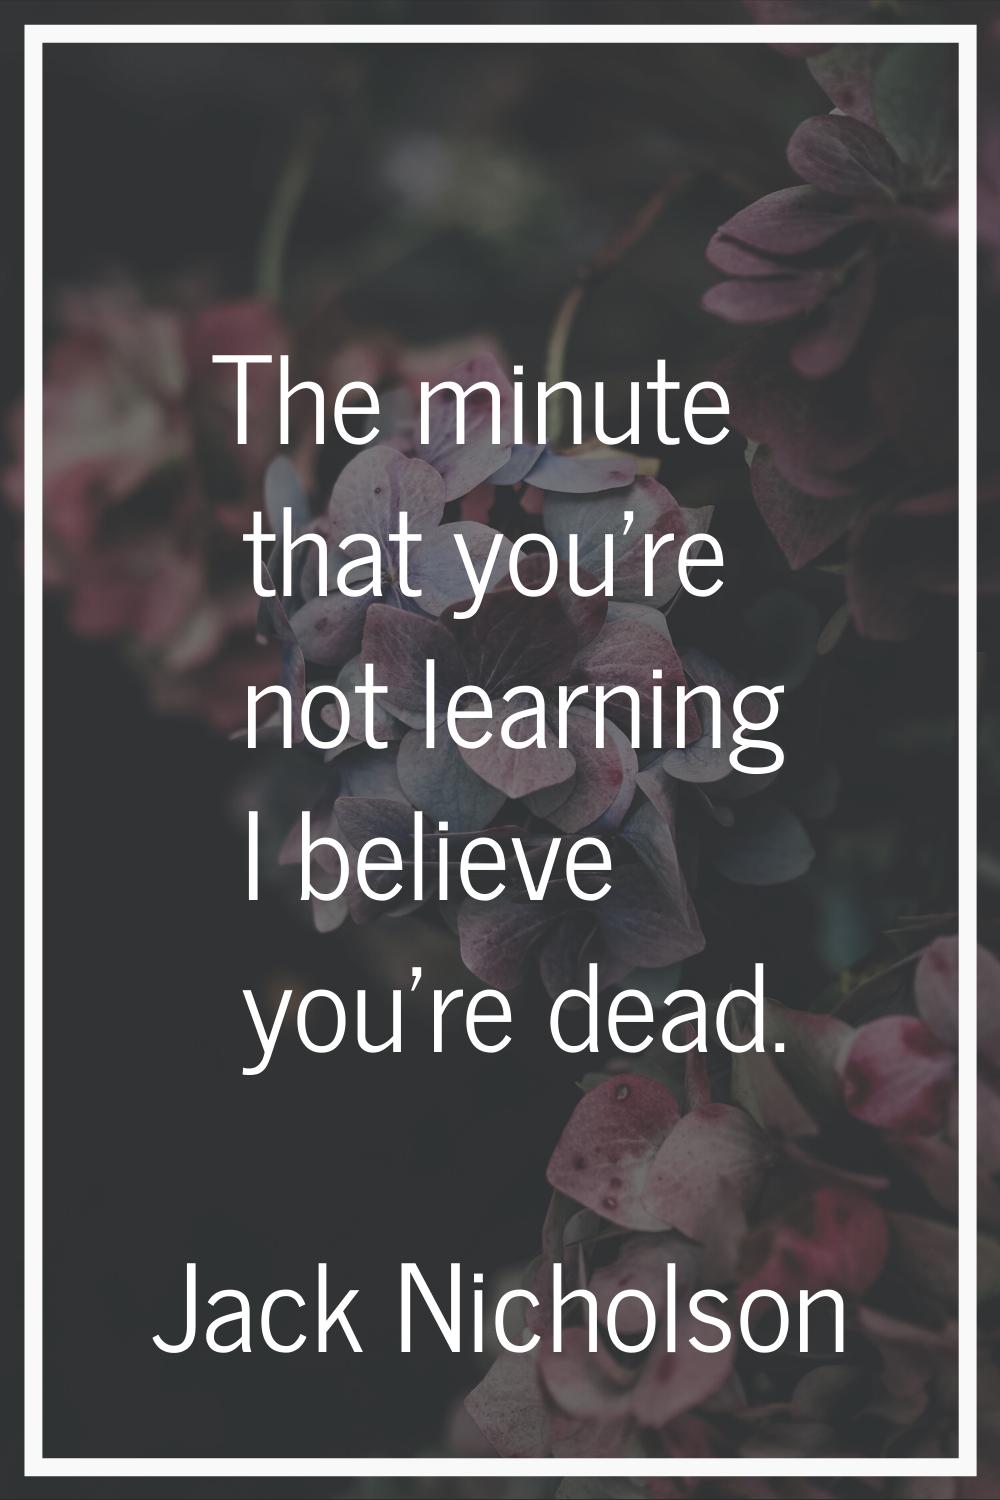 The minute that you're not learning I believe you're dead.